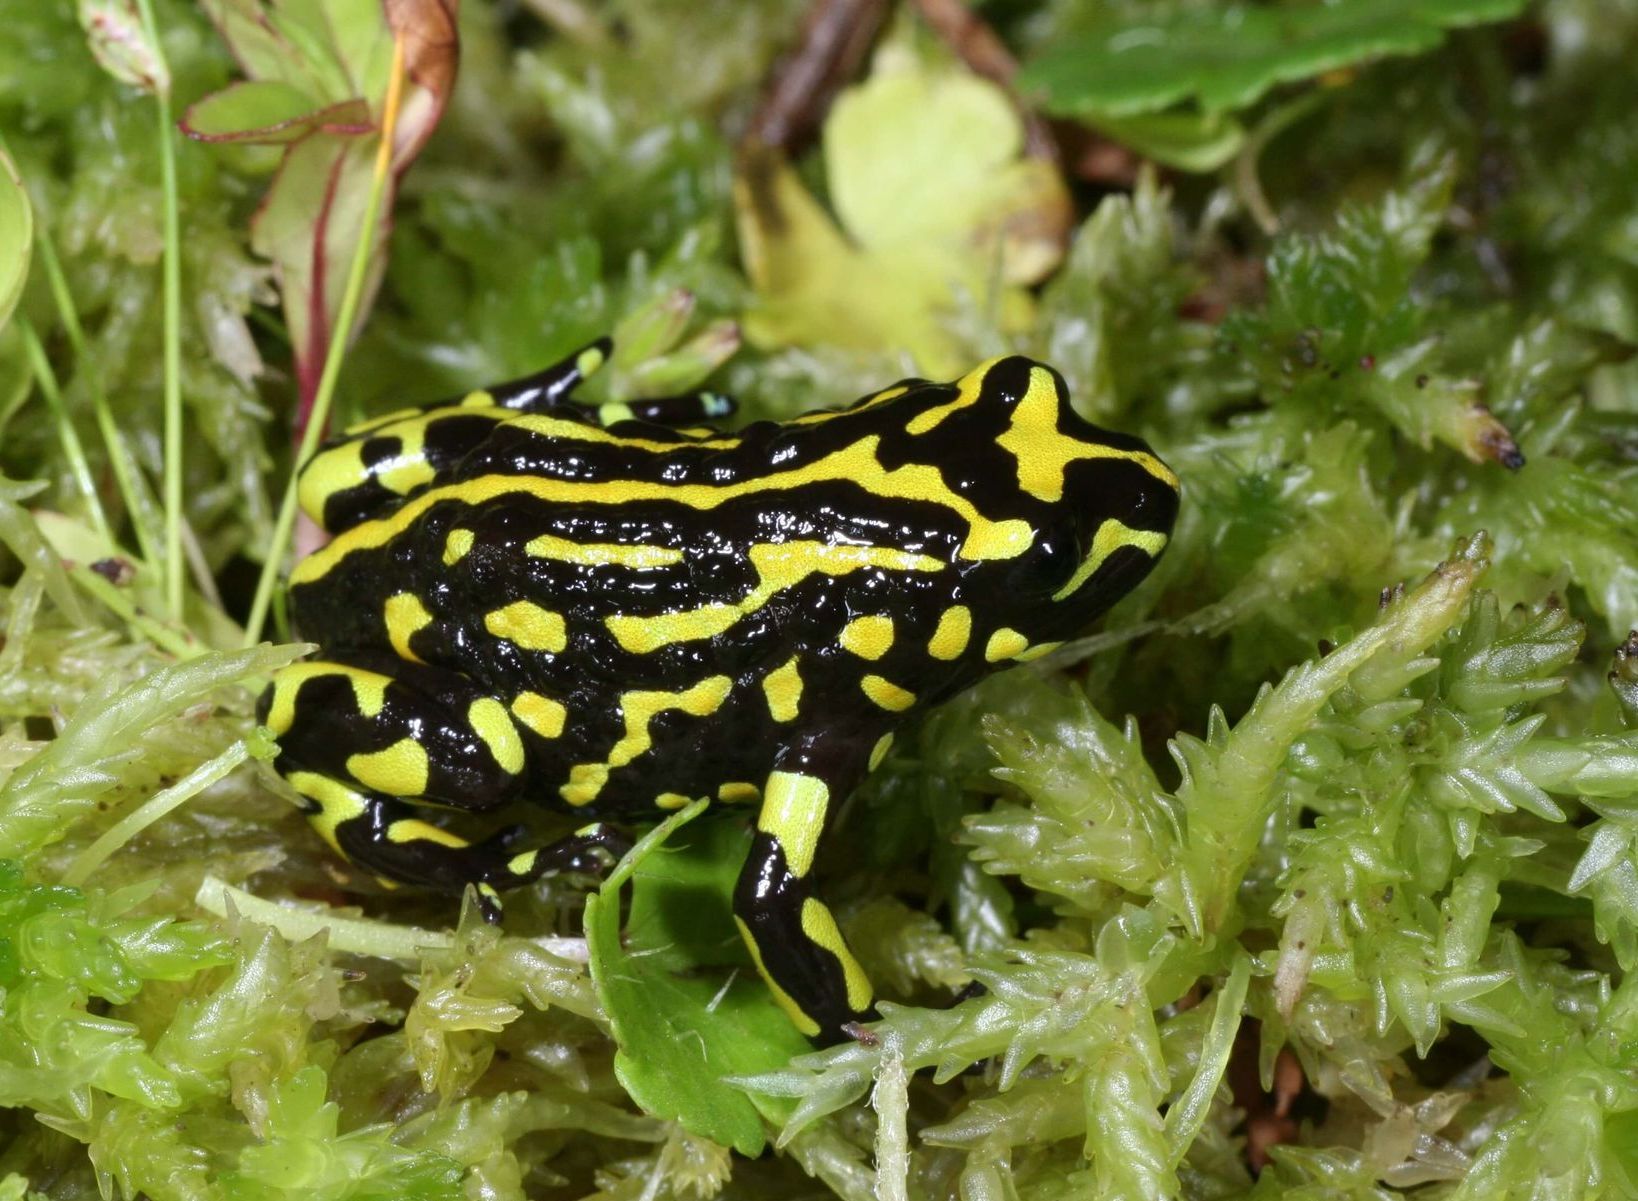 Close-up of the Corroboree frog